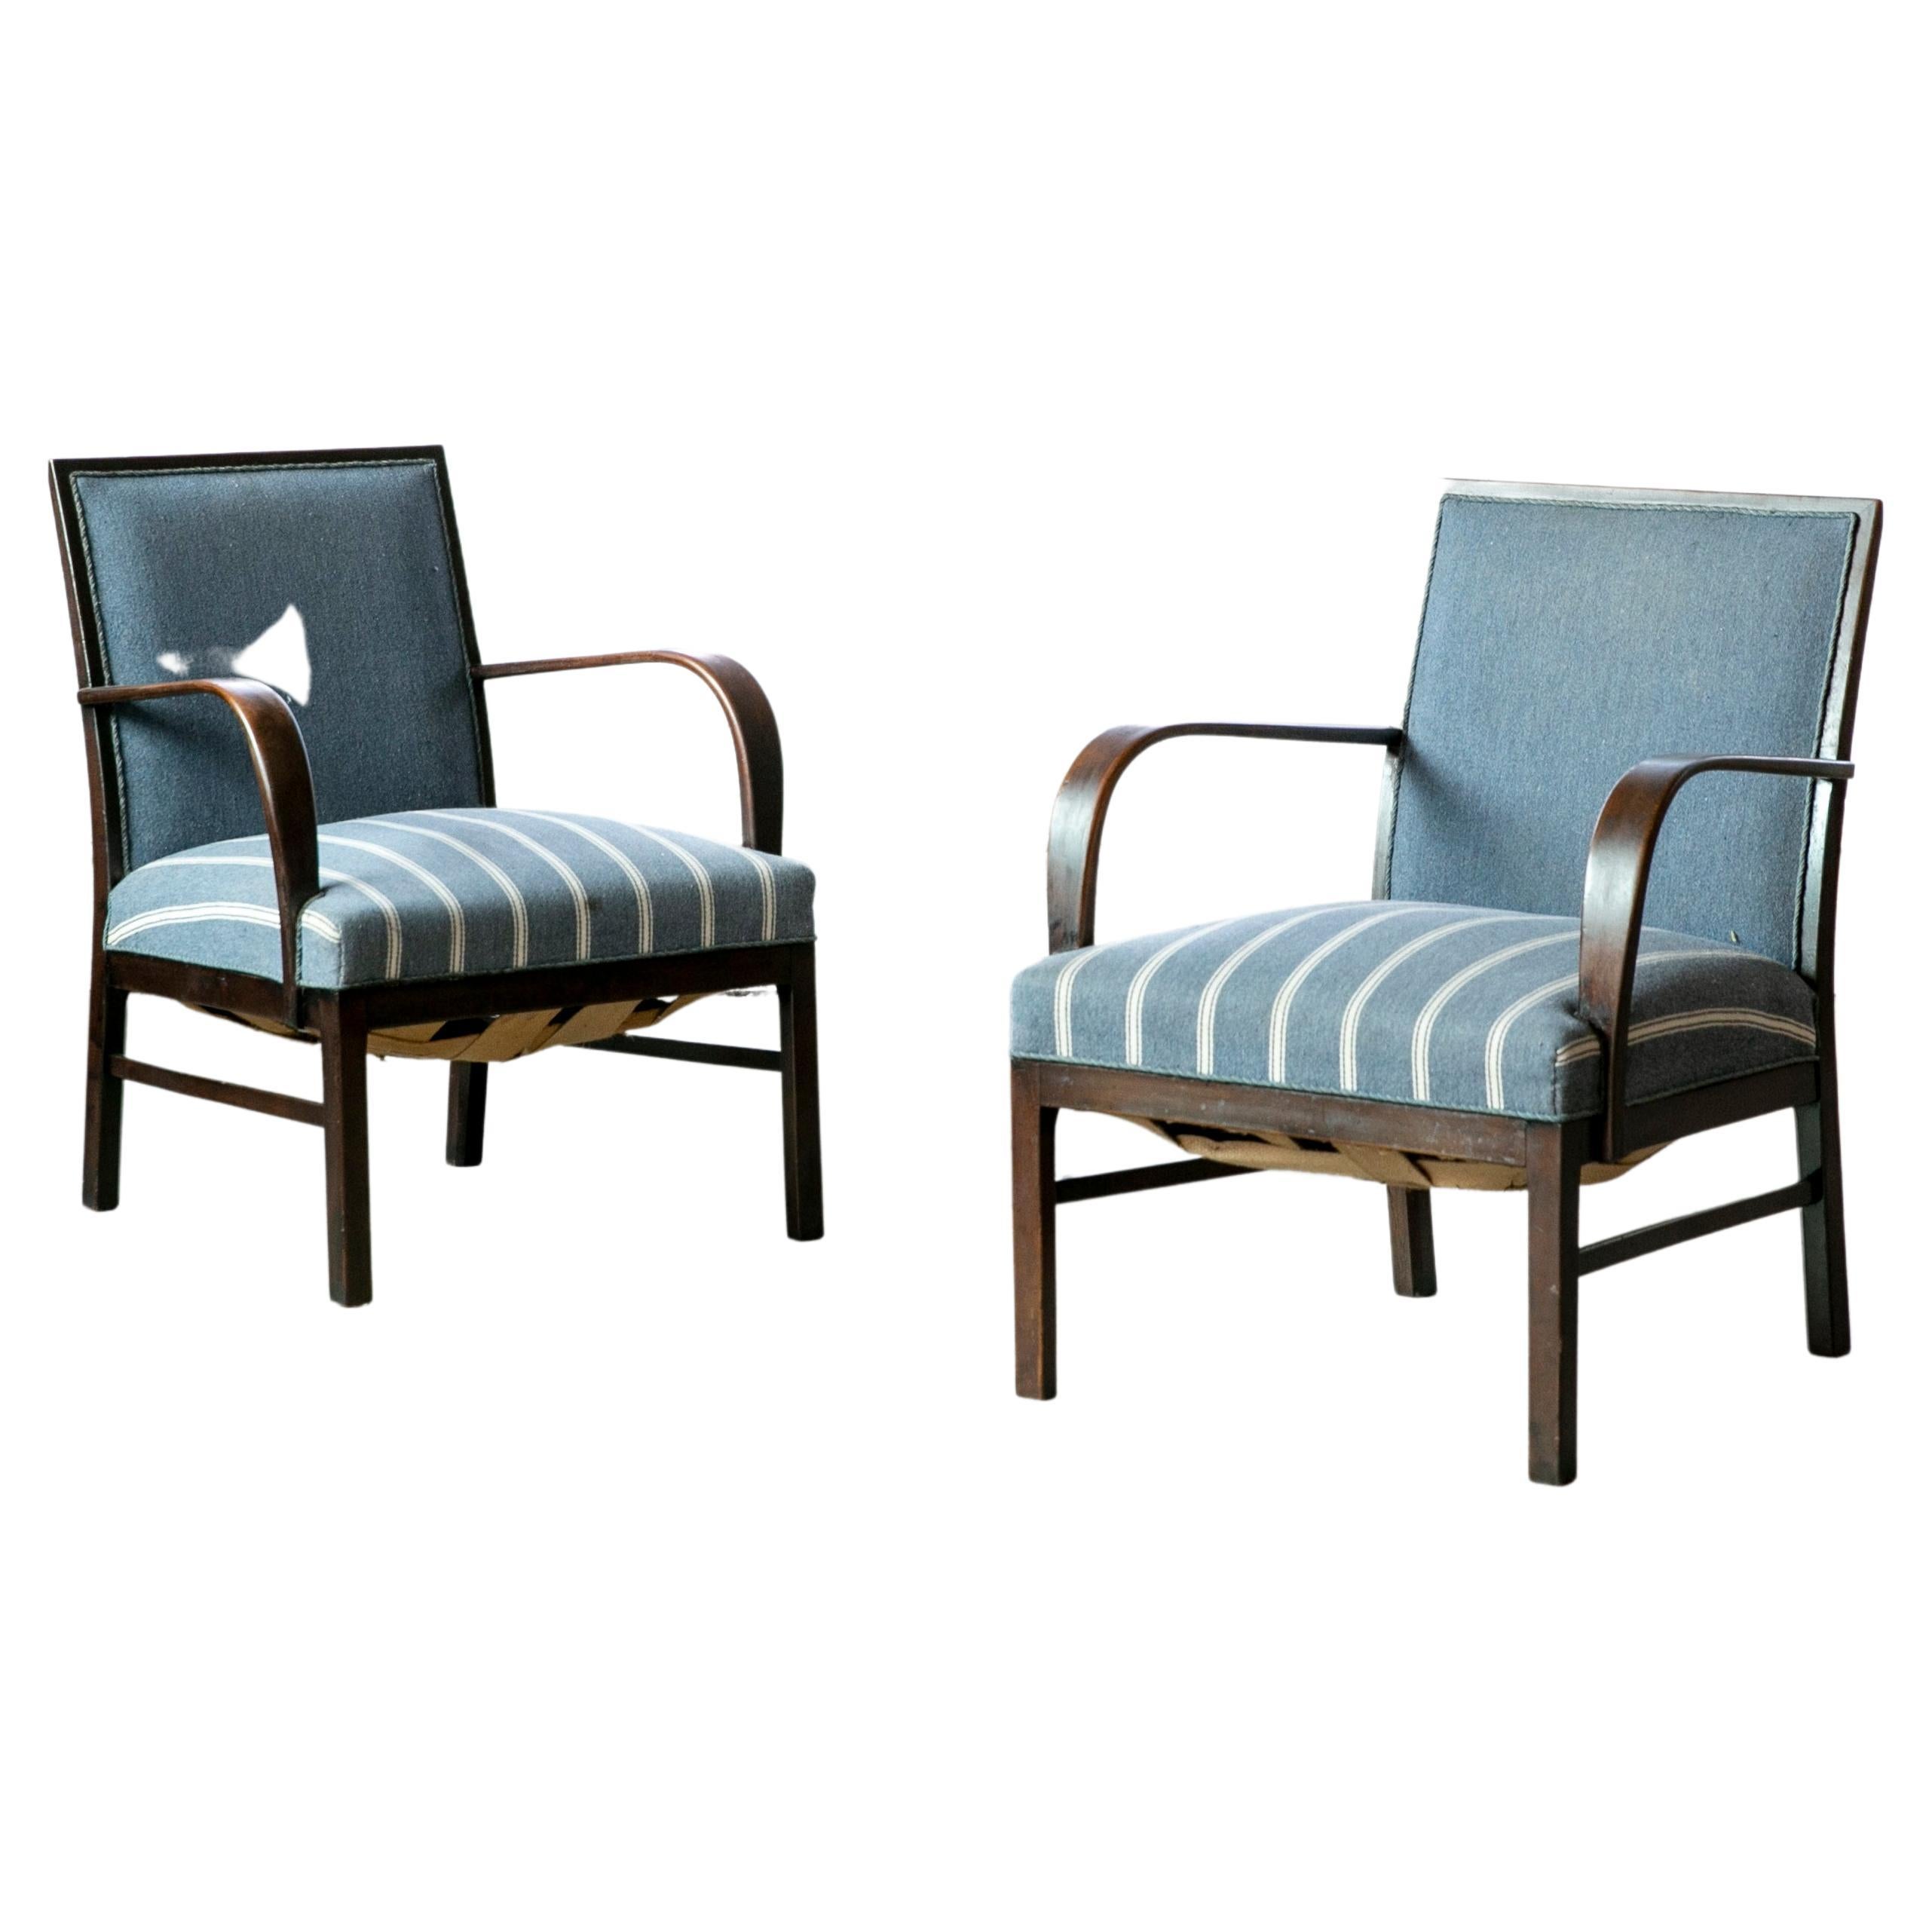 Pair of Danish Early Midcentury or Art Deco Low Lounge Chairs Mahagony, 1940's